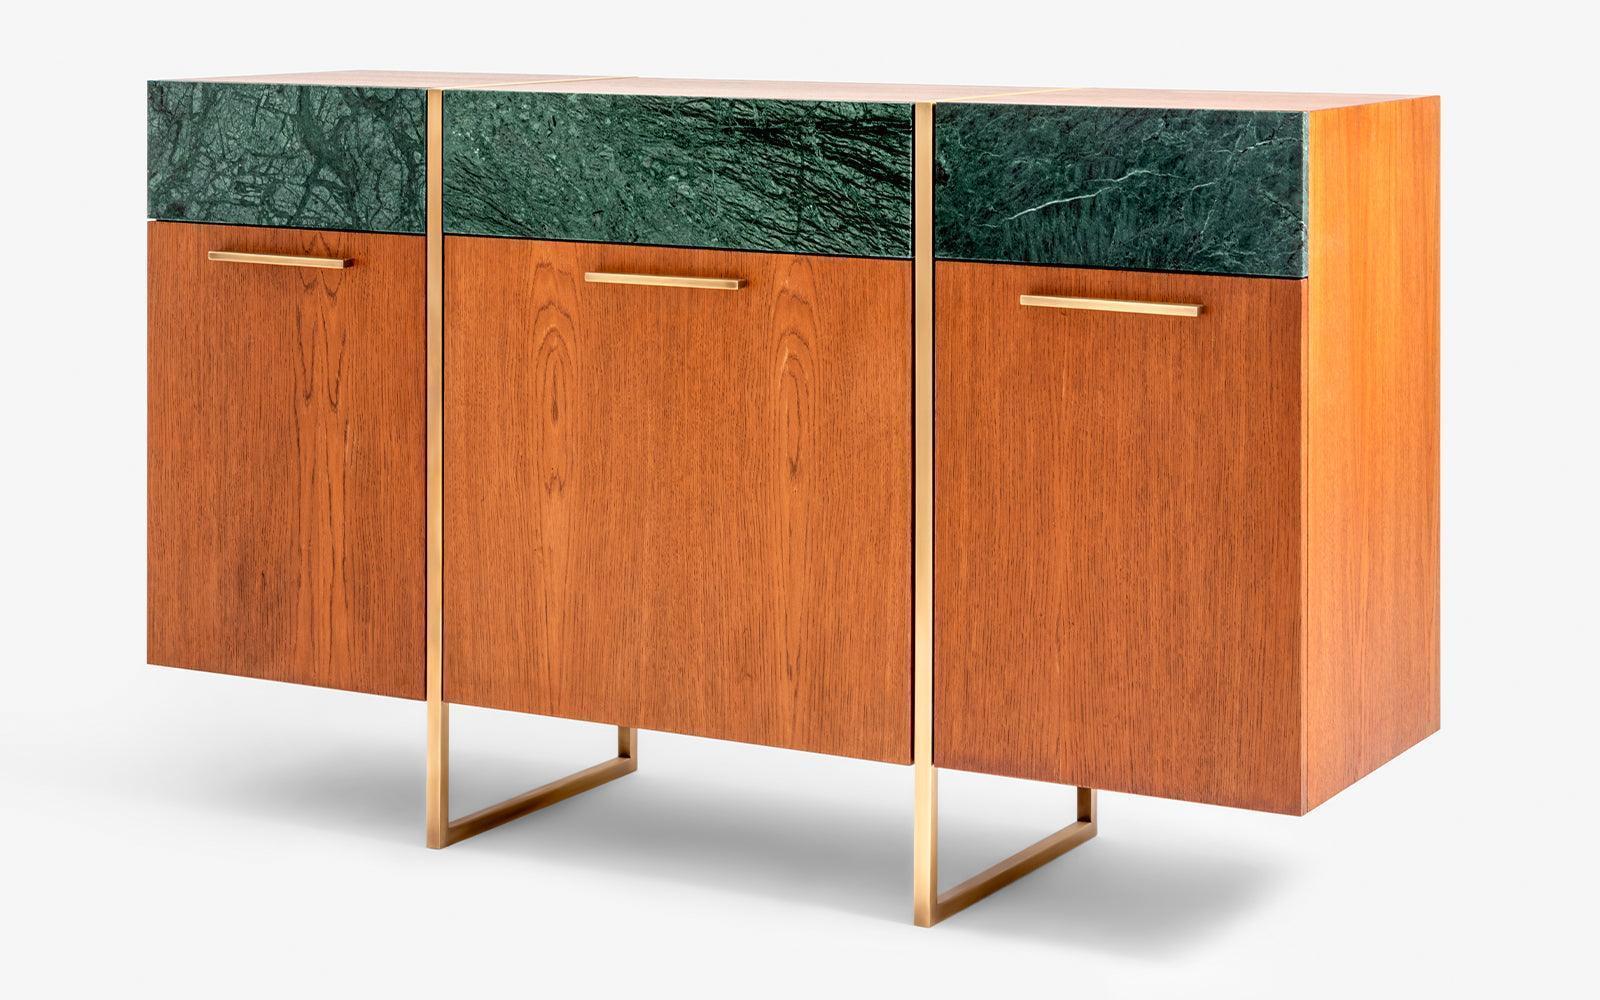 With the renowned FAMED modular consoles, you can live the heavyweight style of aging brass and black wood in your dining areas and halls. The No:1, No:2, and No:3 named consoles draw attention to their modern design and geometric form, and are